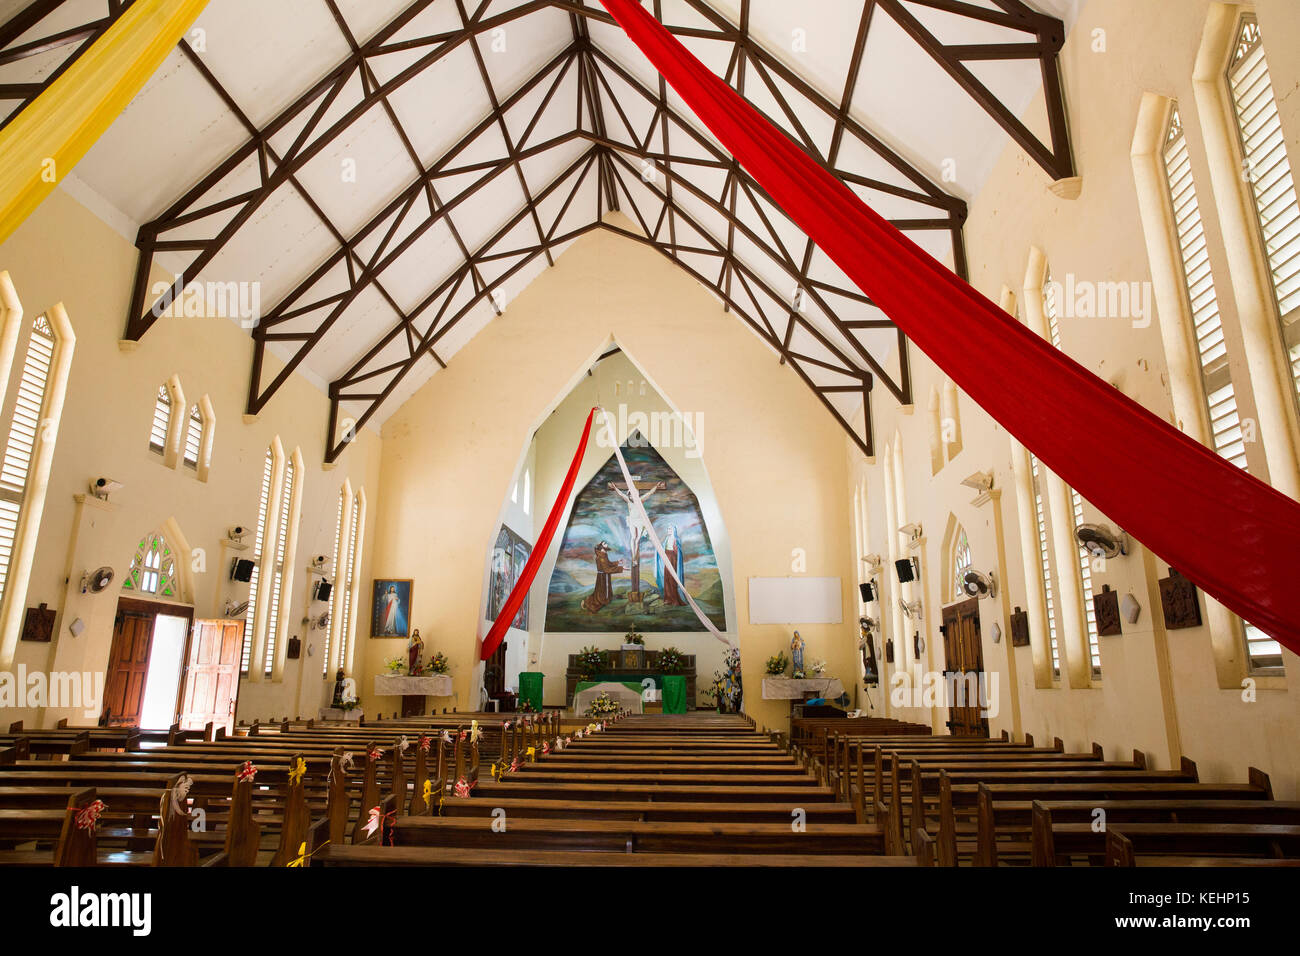 The Seychelles, Mahe, Baie Lazare, St Francis of Assisi RC Church, Eglise St Francois d’Assise, interior Stock Photo